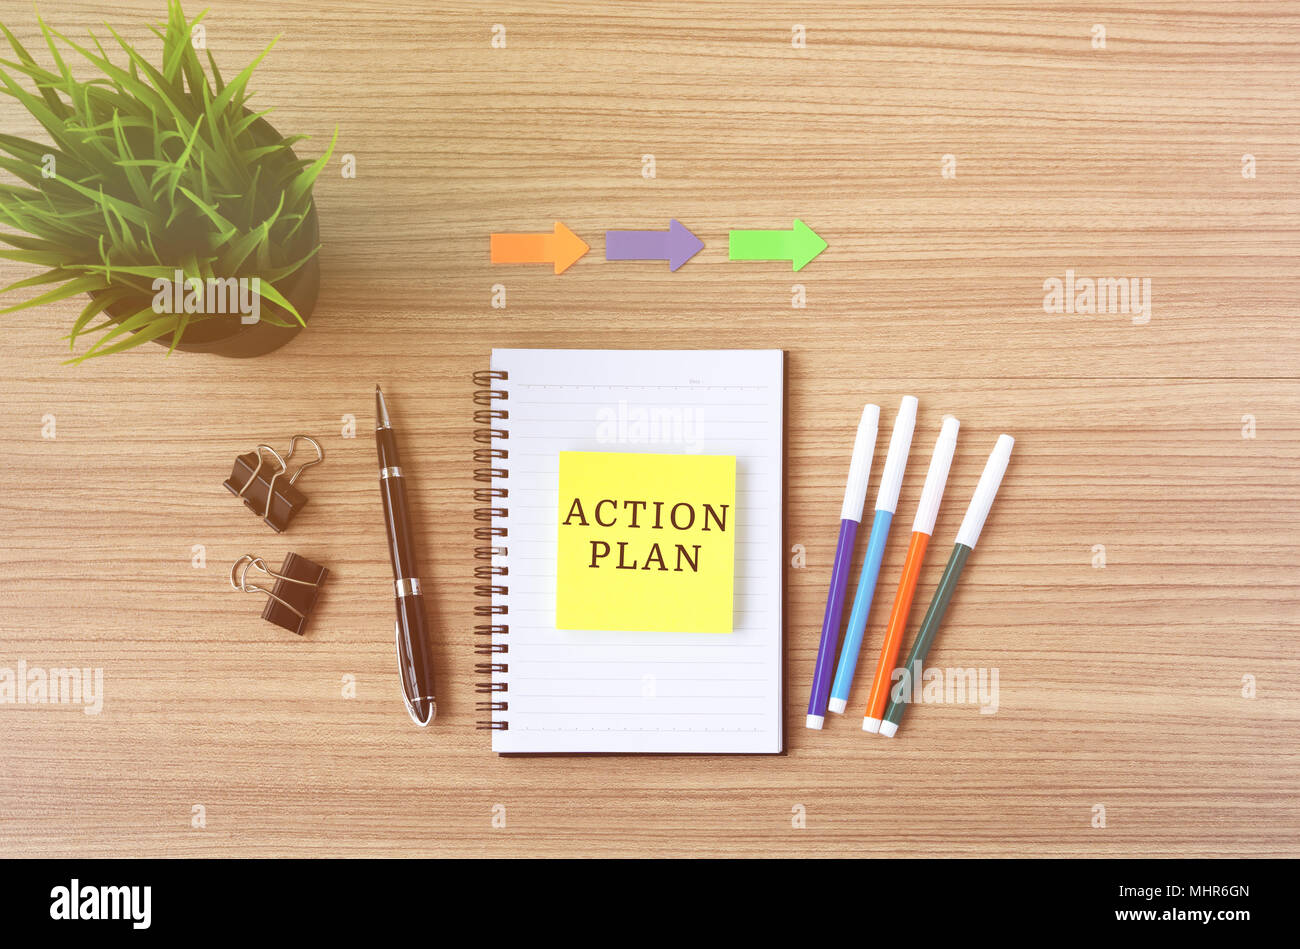 Action Plan text on sticky note, flat lay business office desk. Stock Photo